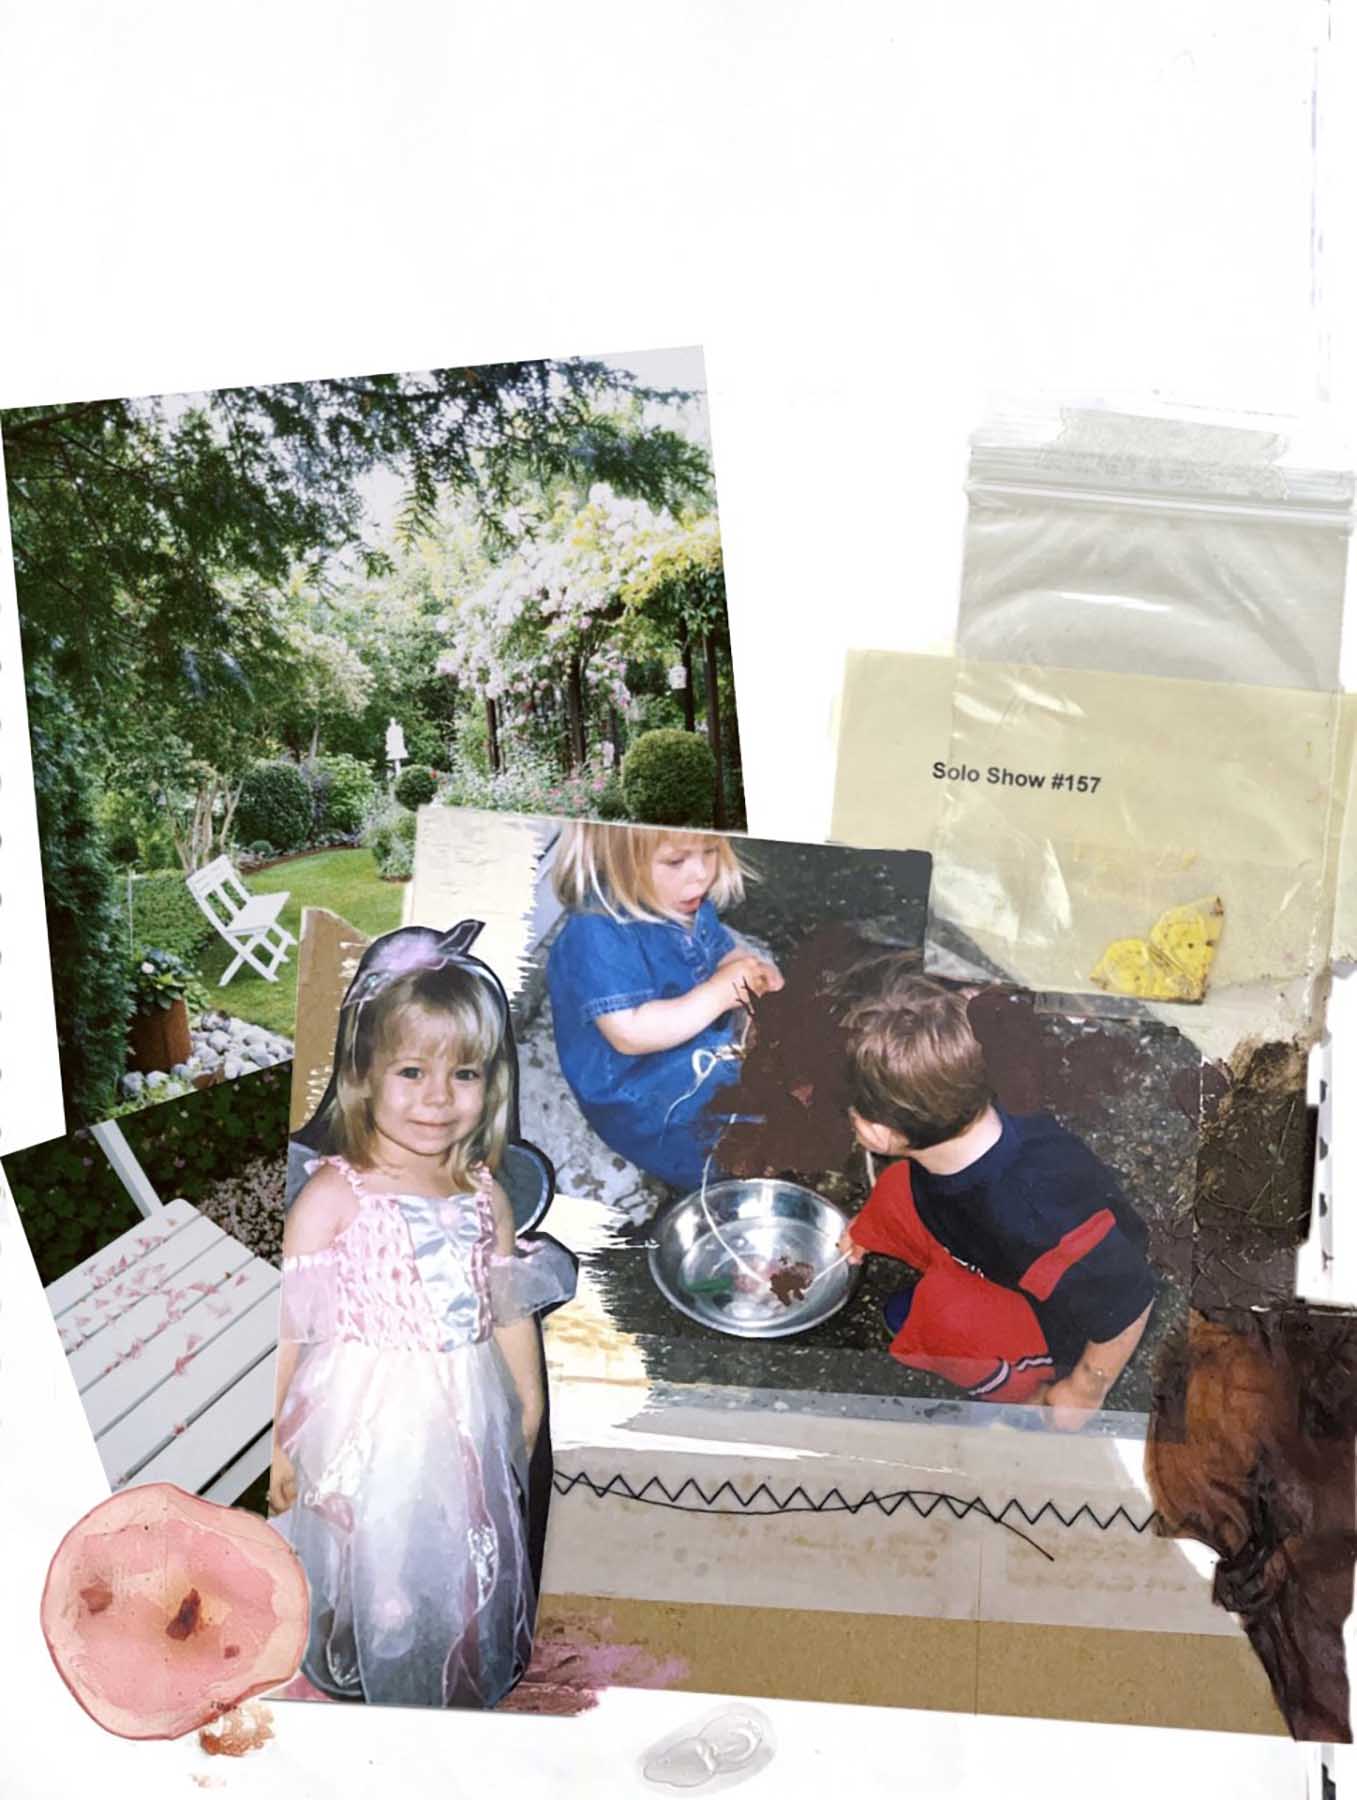 BA Fashion Design work by Mollie Green showing collage of primary childhood images of her playing in her nans garden making potions